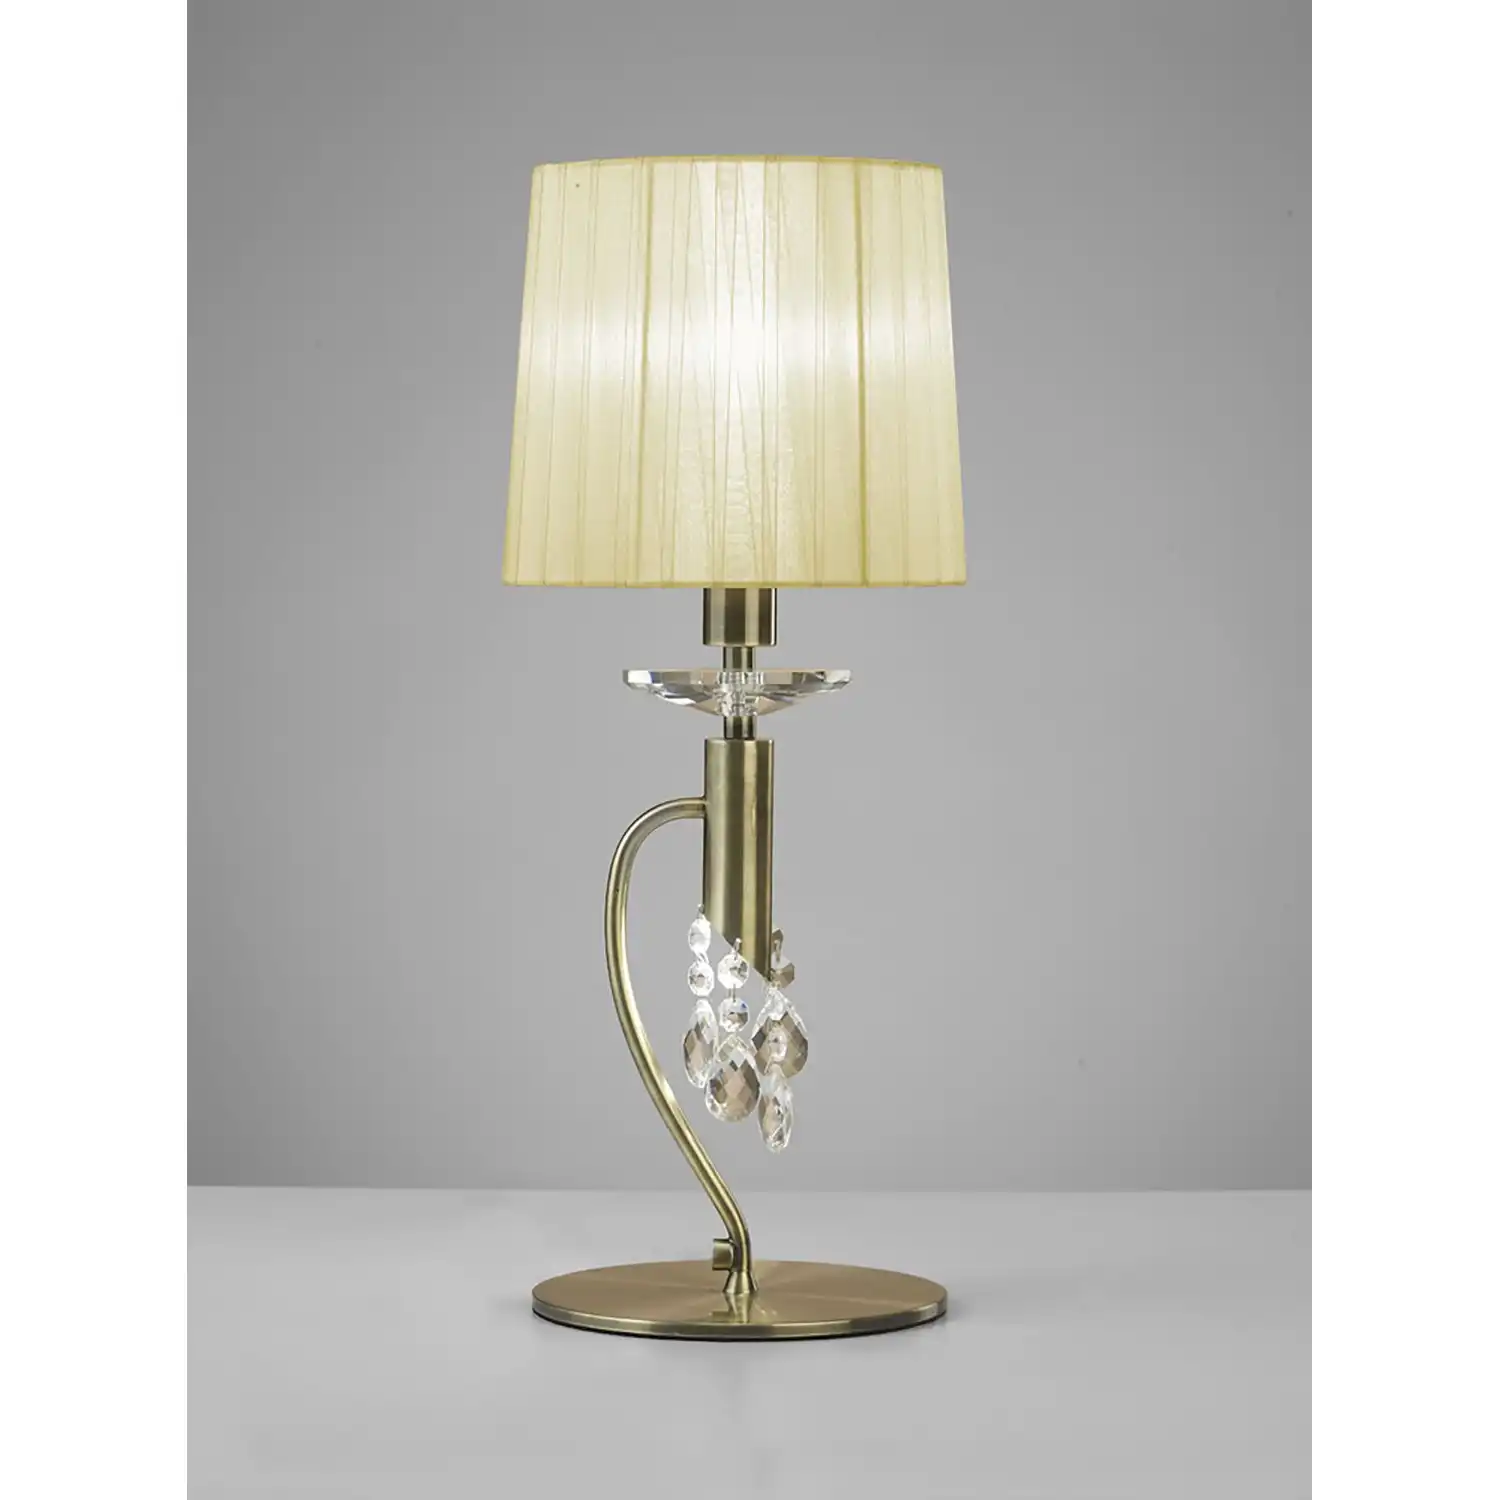 Tiffany Table Lamp 1+1 Light E14+G9, Antique Brass With Cream Shade And Clear Crystal